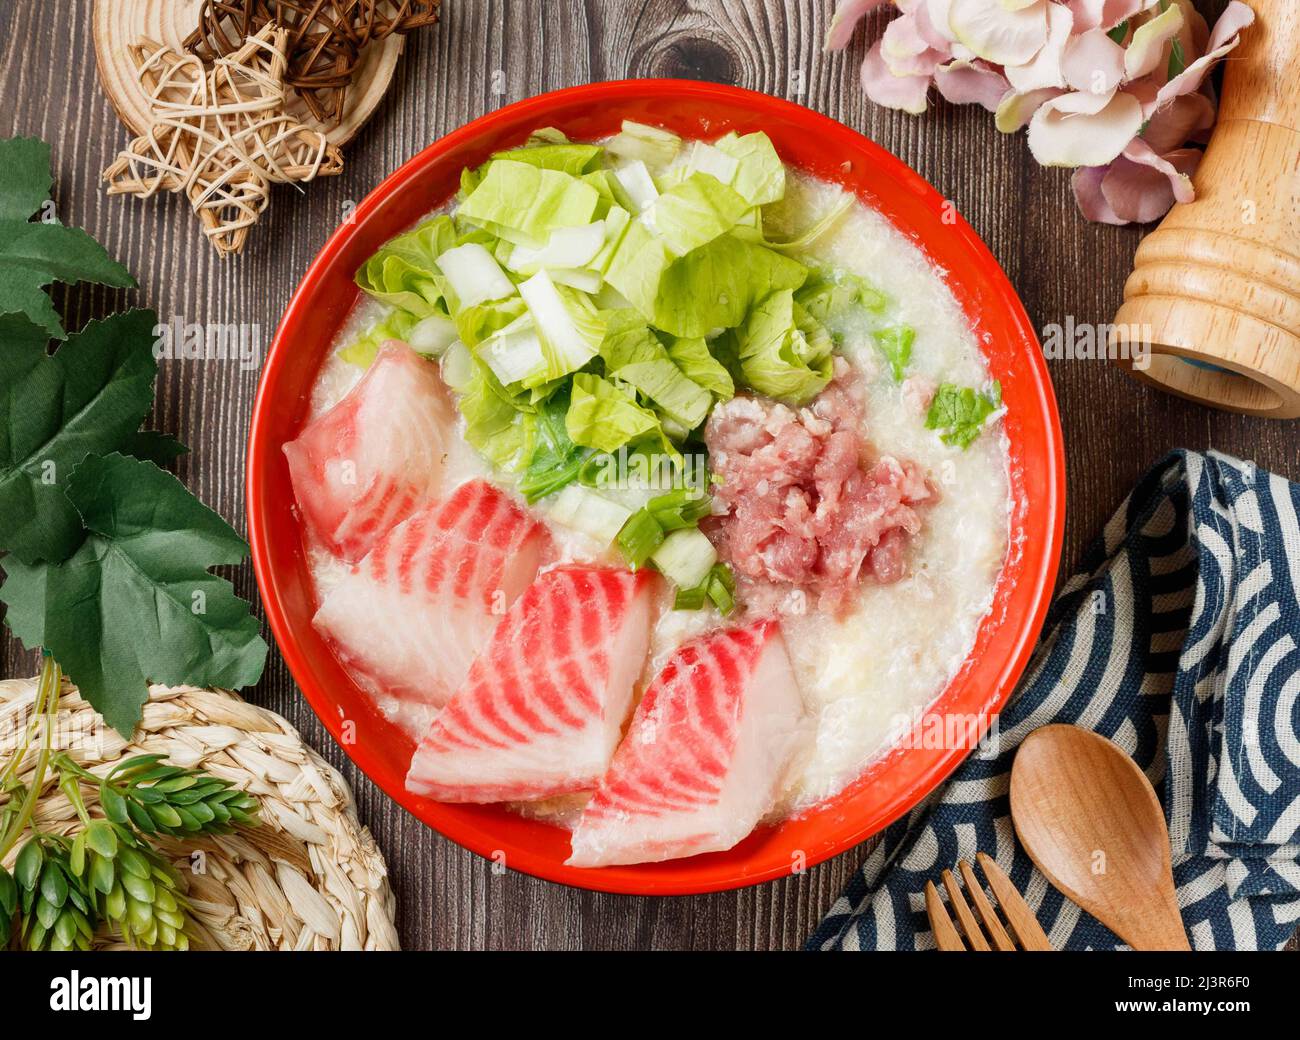 Fish fillet lean meat porridge in a bowl top view on wooden table taiwan food Stock Photo